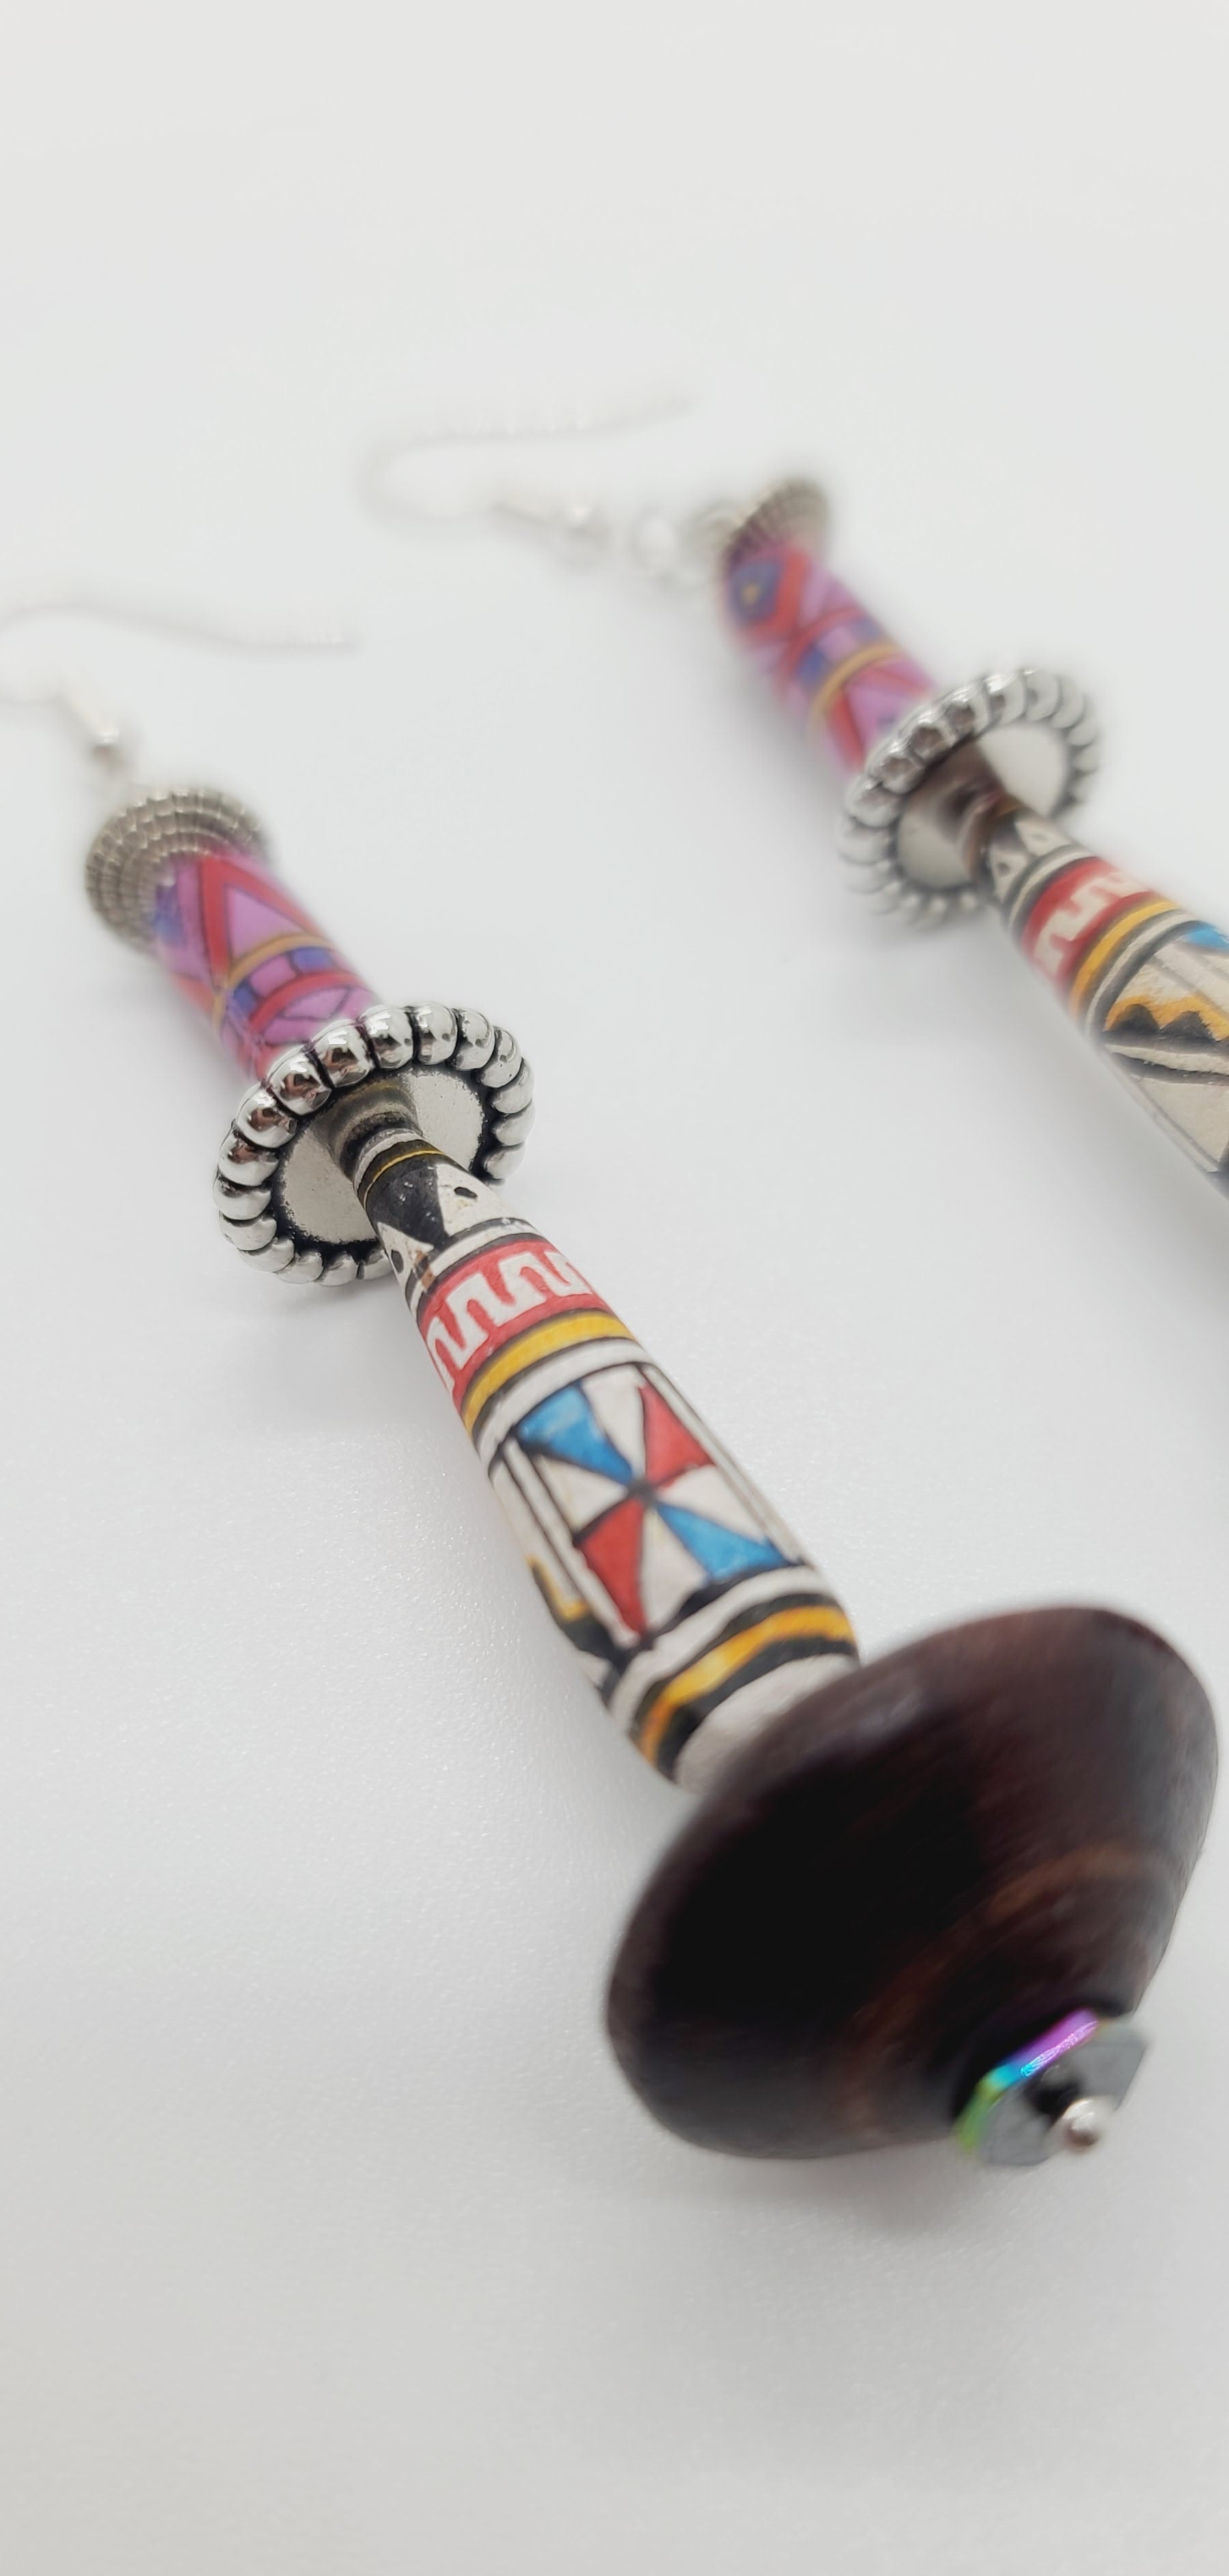 Length: 3 inches | Weight: 0.5 ounces  Distinctly You! These earrings are made with brown wooden Bicone beads, ethnic print beads, accented with silver rondelles.